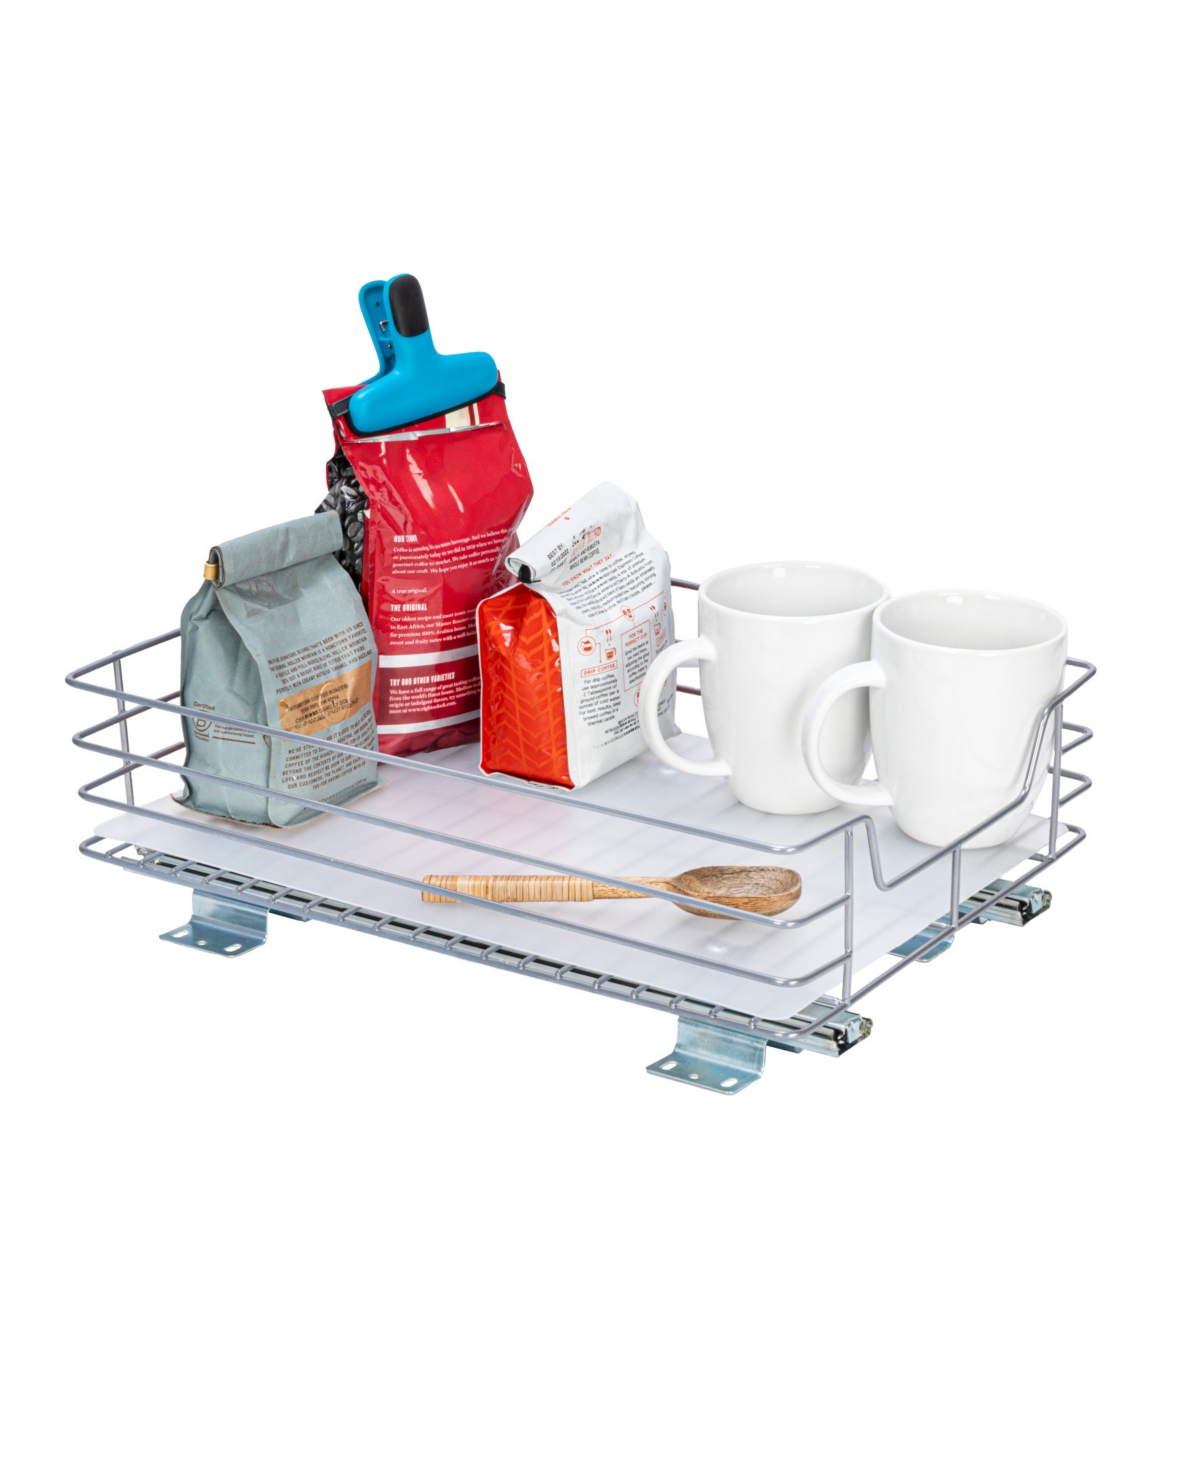 Glidez Steel Pull-Out/Slide-Out Storage Organizer with Plastic Liner for Under Cabinet or Wire Shelf 1-Tier Design - Silver